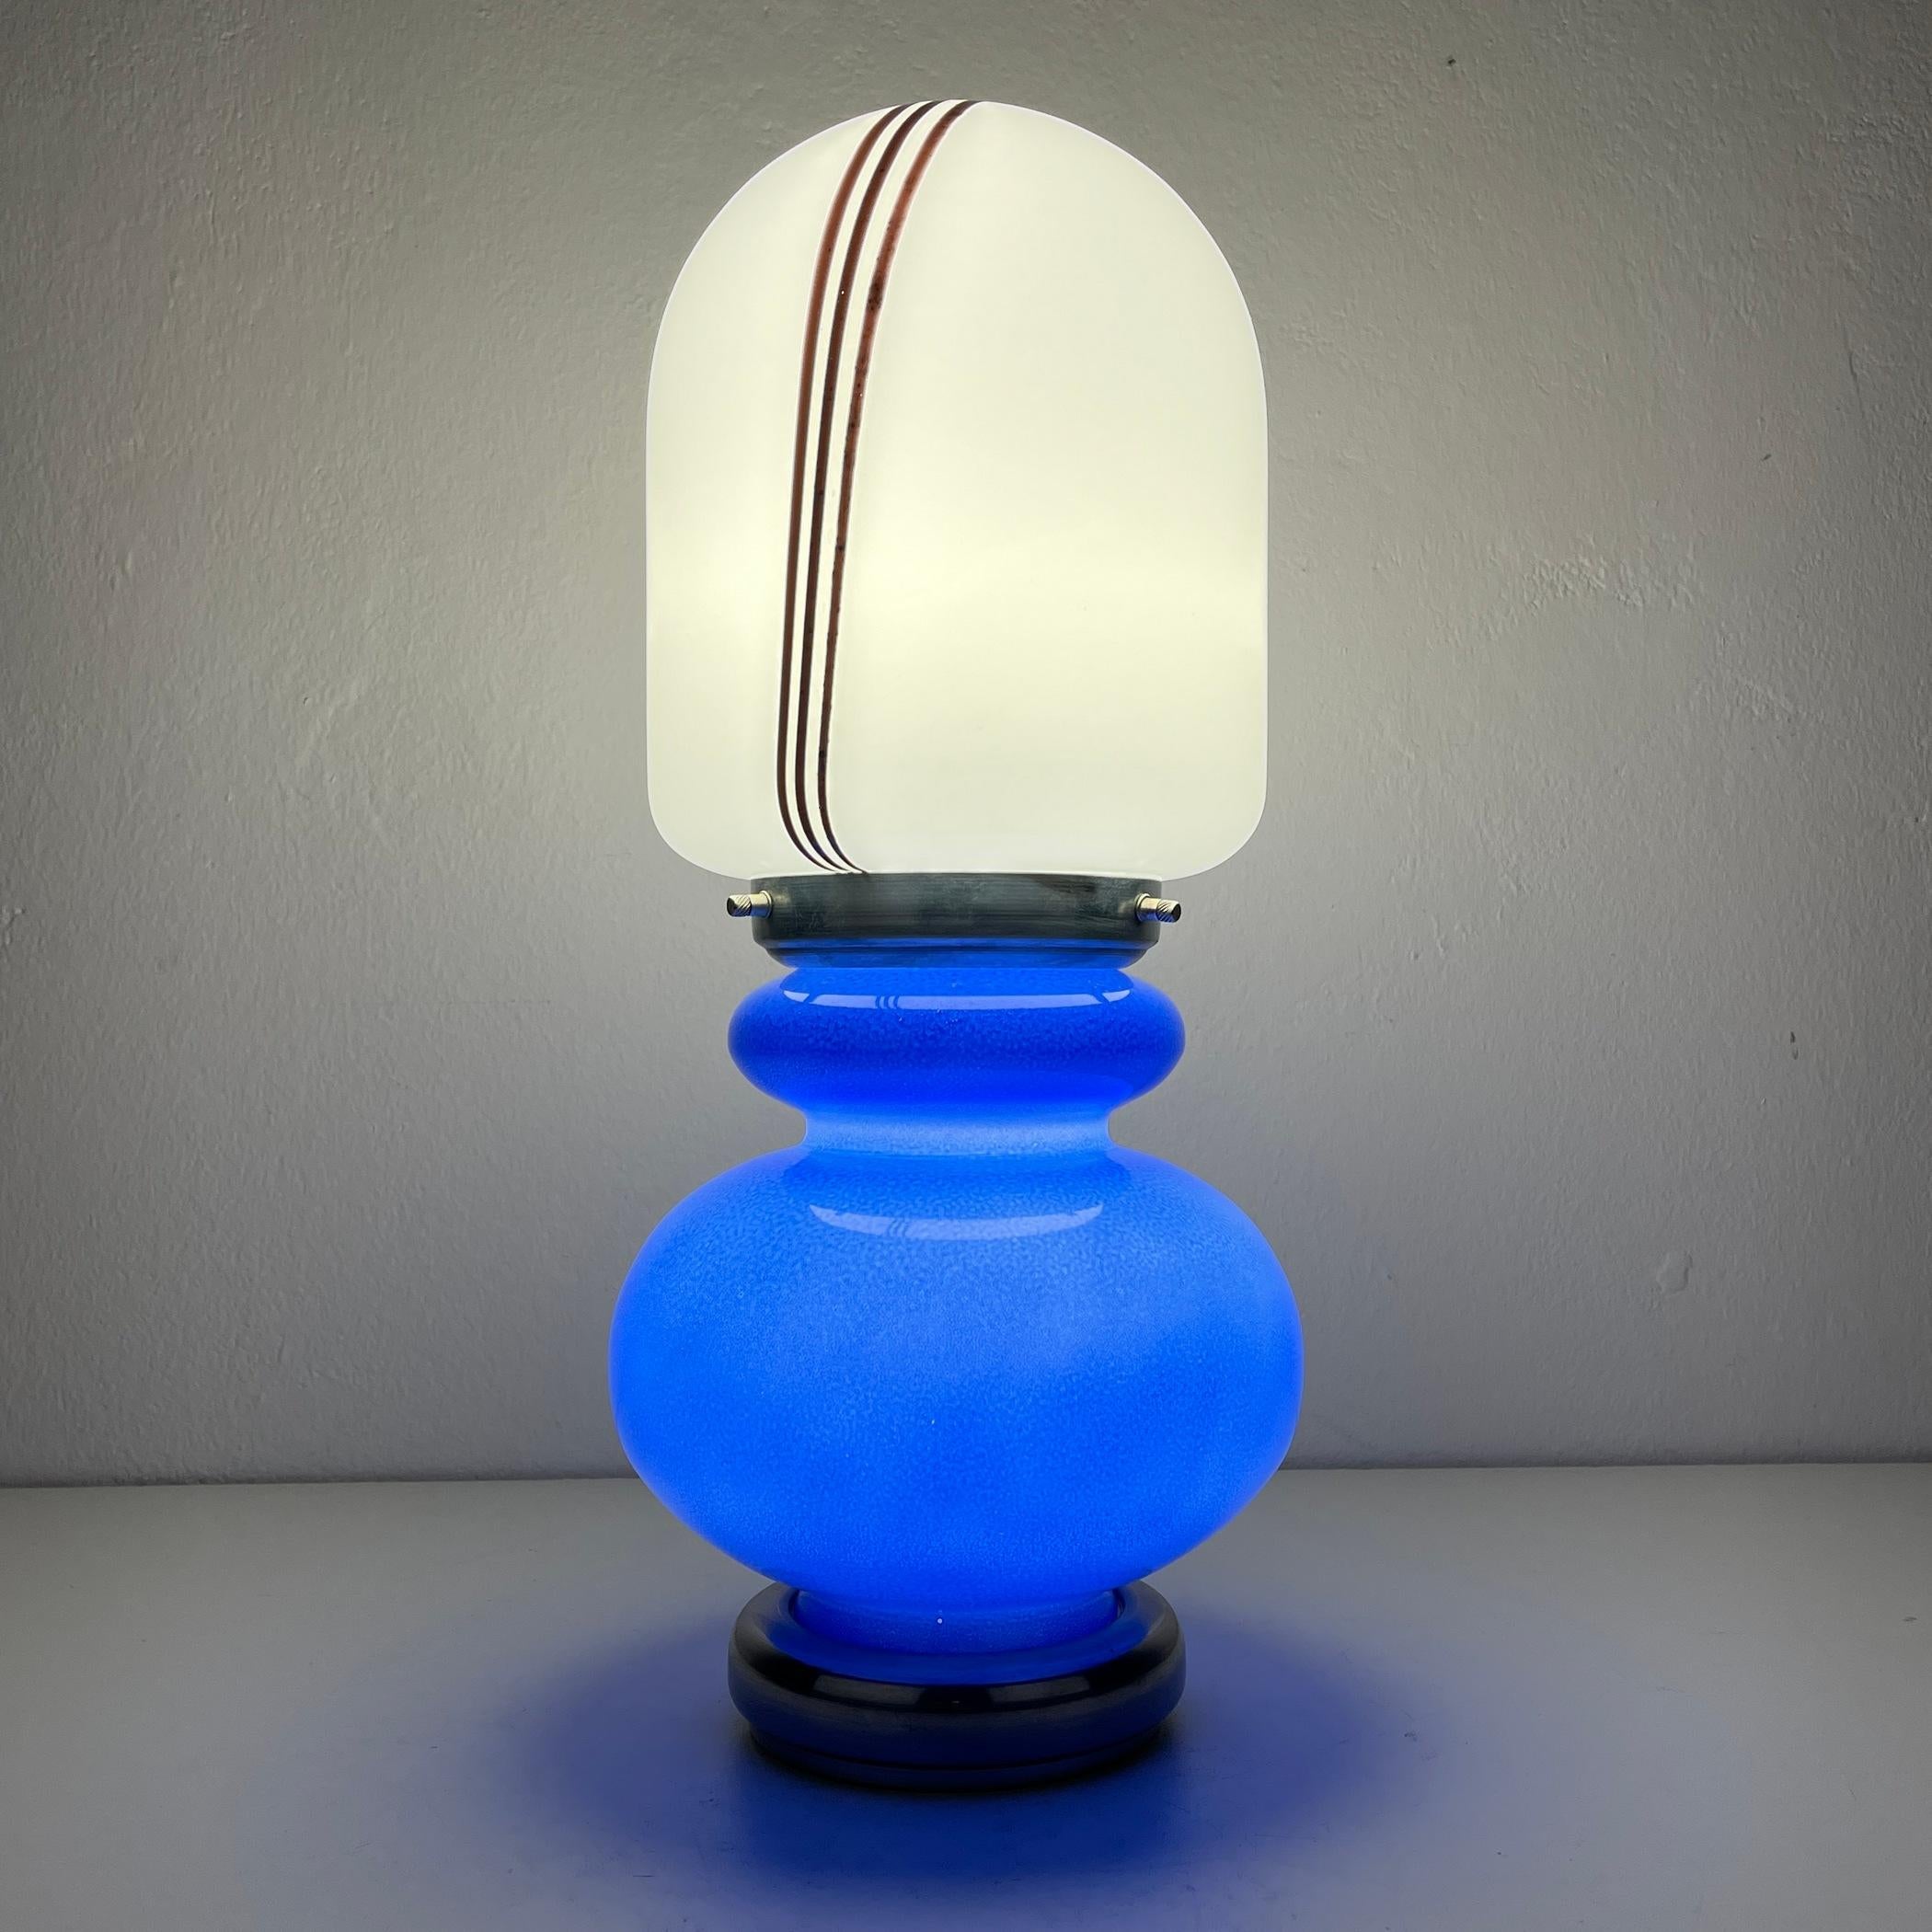 Introducing a charming table lamp, expertly crafted in Italy during the vibrant 1980s. Despite their vintage, this lamp is in impeccable condition, boasting glass that's free from any chips or cracks. This distinctive lamp consist of two glass